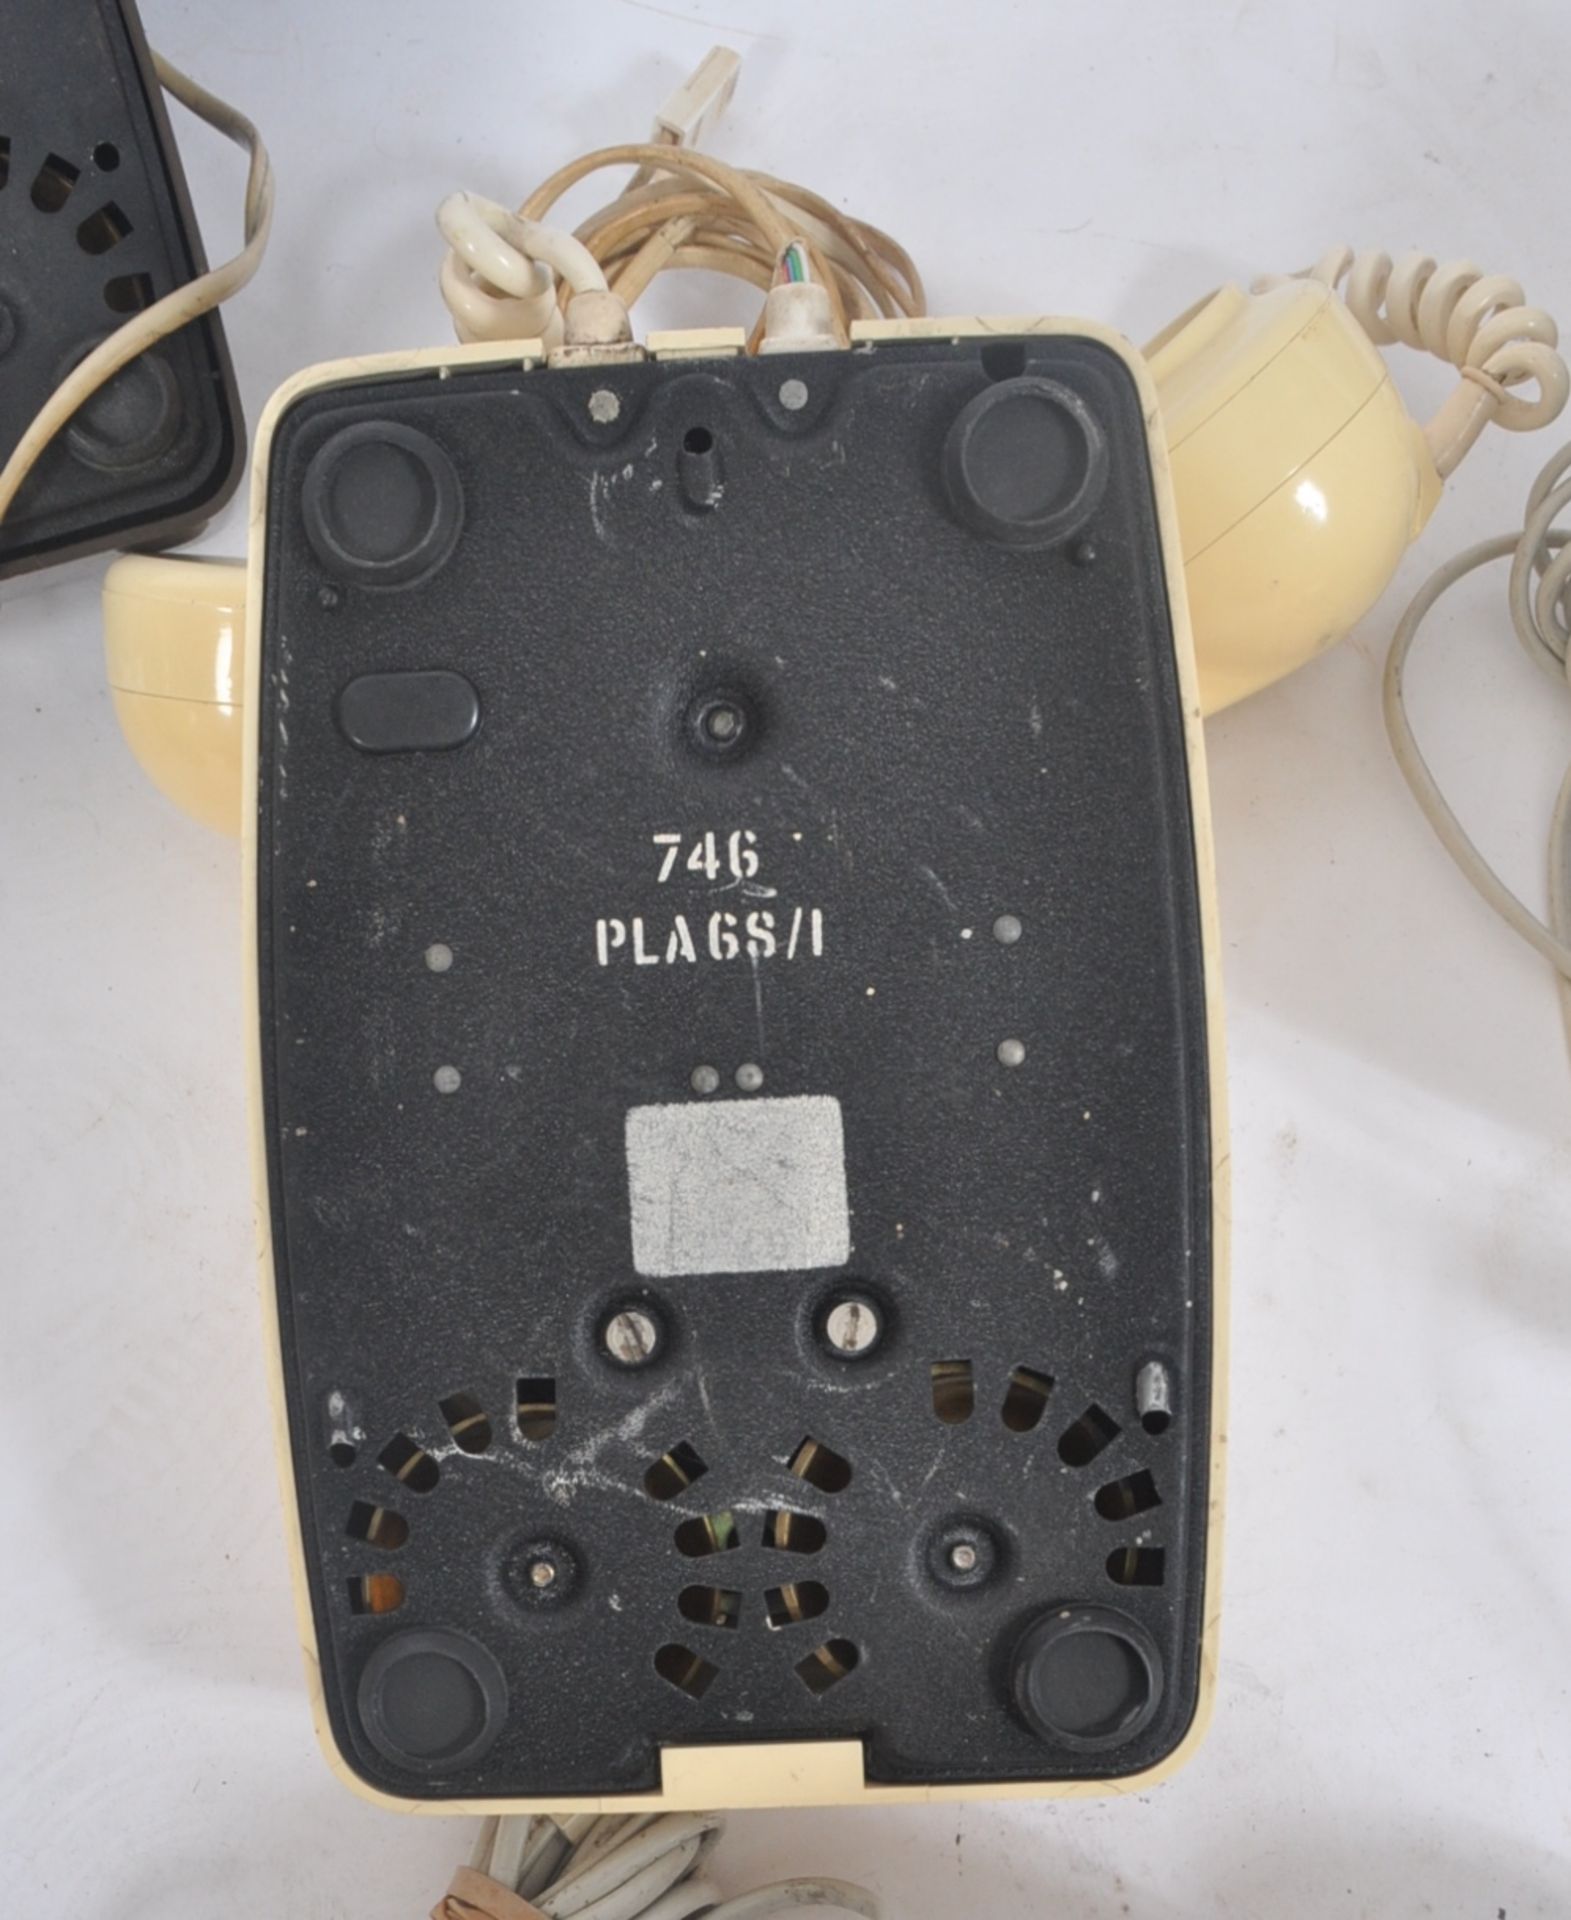 COLLECTION OF TWELVE VINTAGE 1970S ROTARY DIAL GPO TELEPHONES - Image 6 of 6